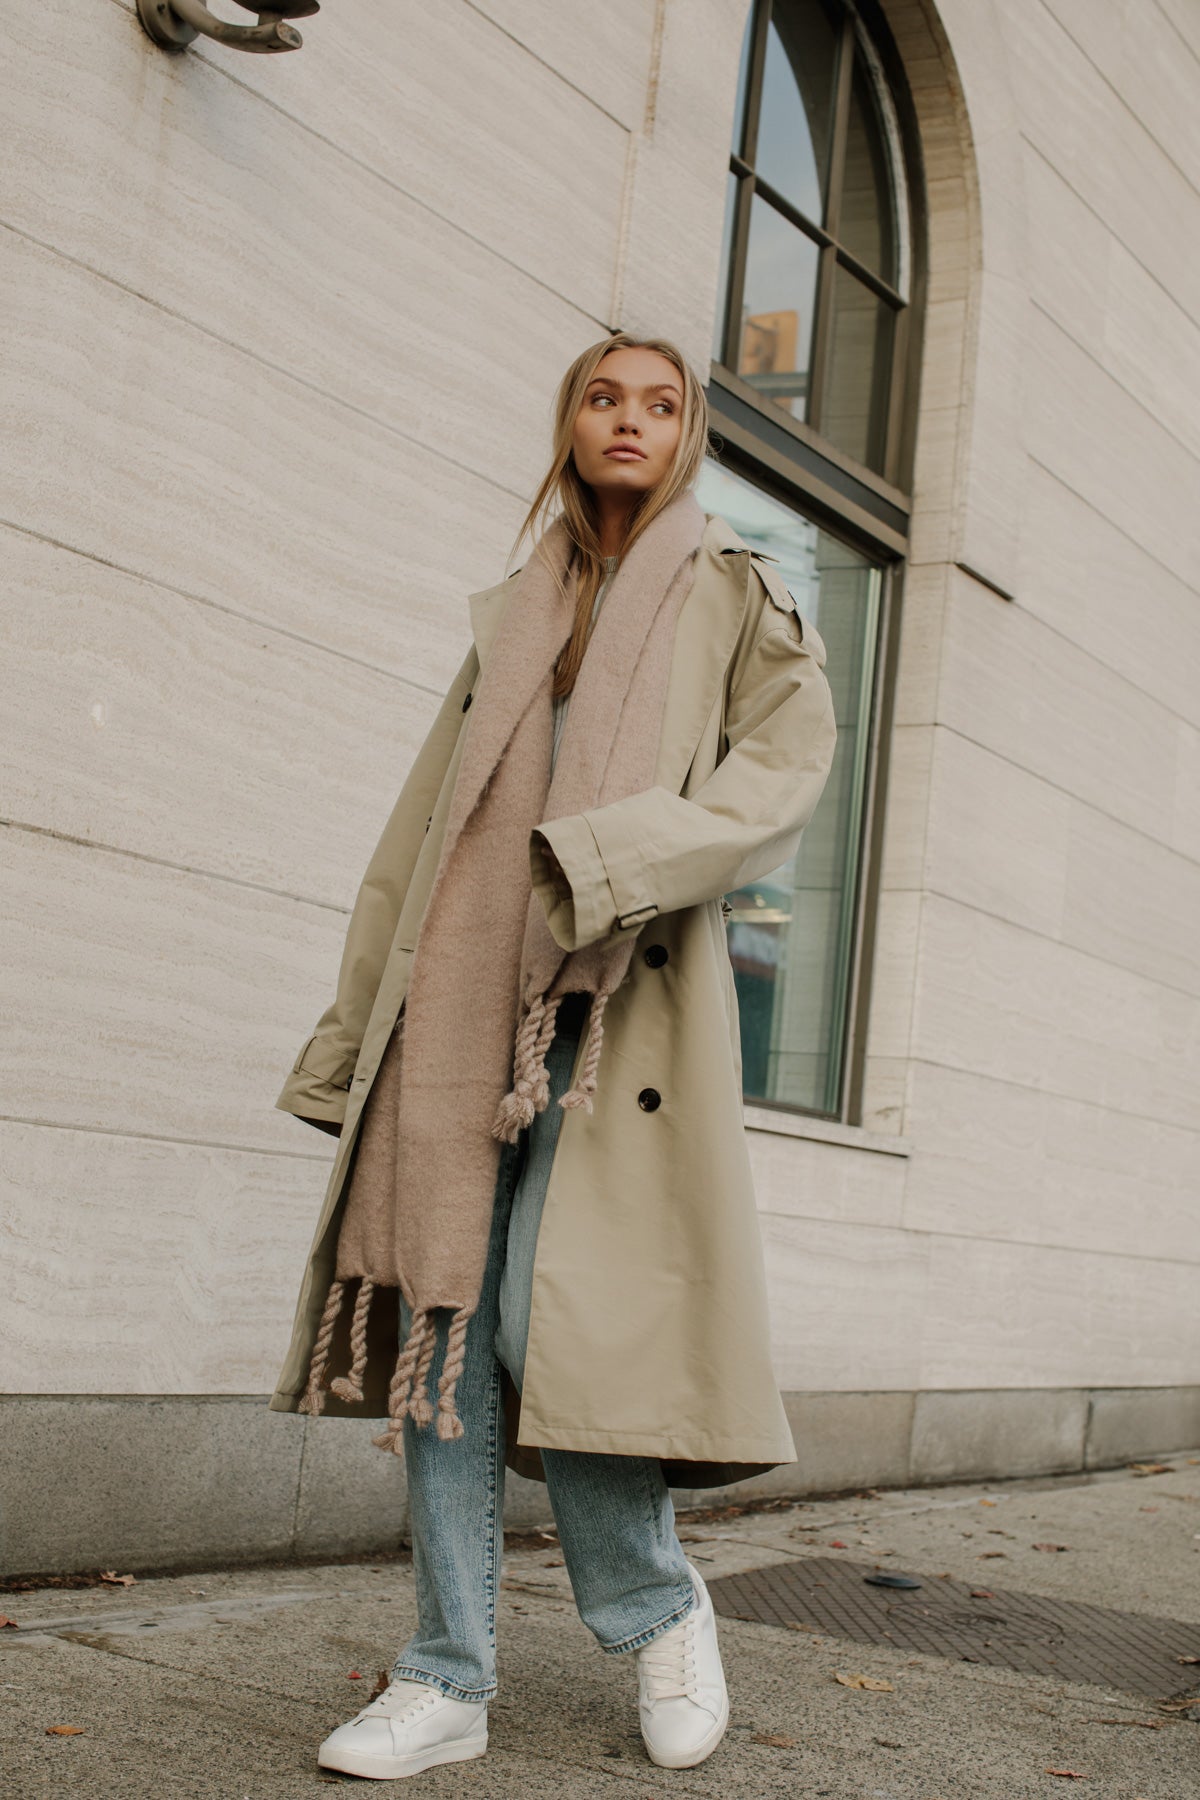 Long Coats: Shop 202 Brands up to −83%